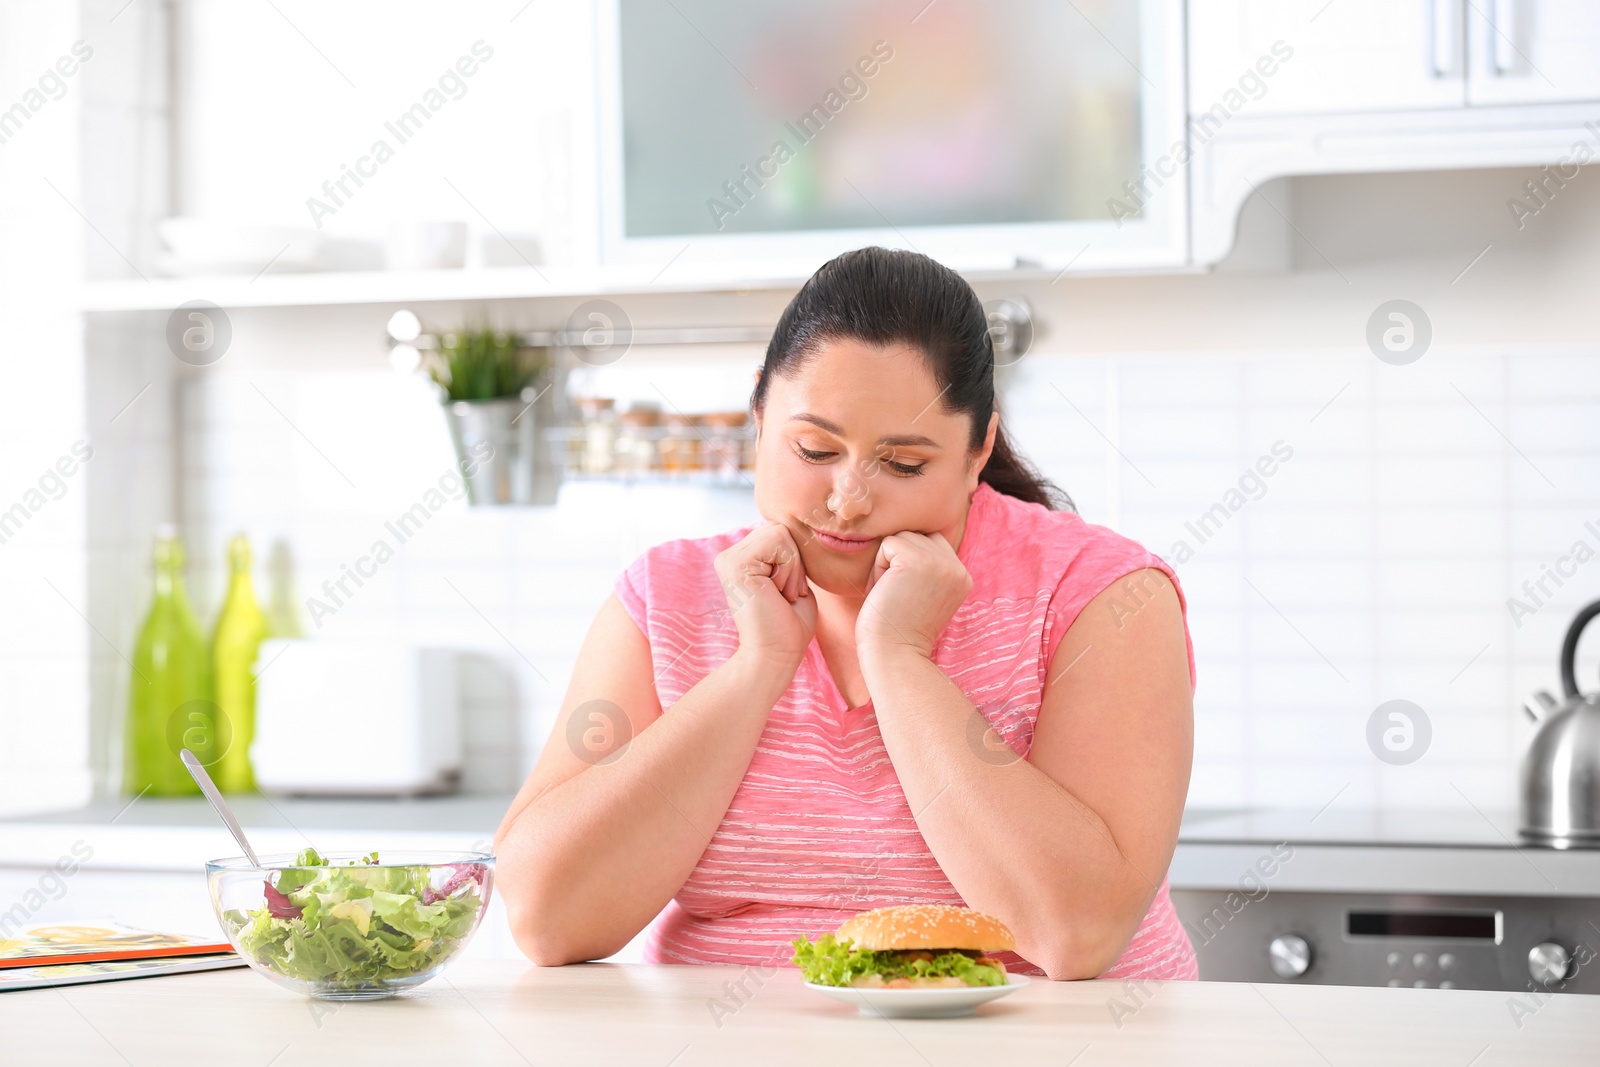 Photo of Sad overweight woman choosing between salad and burger in kitchen. Healthy diet